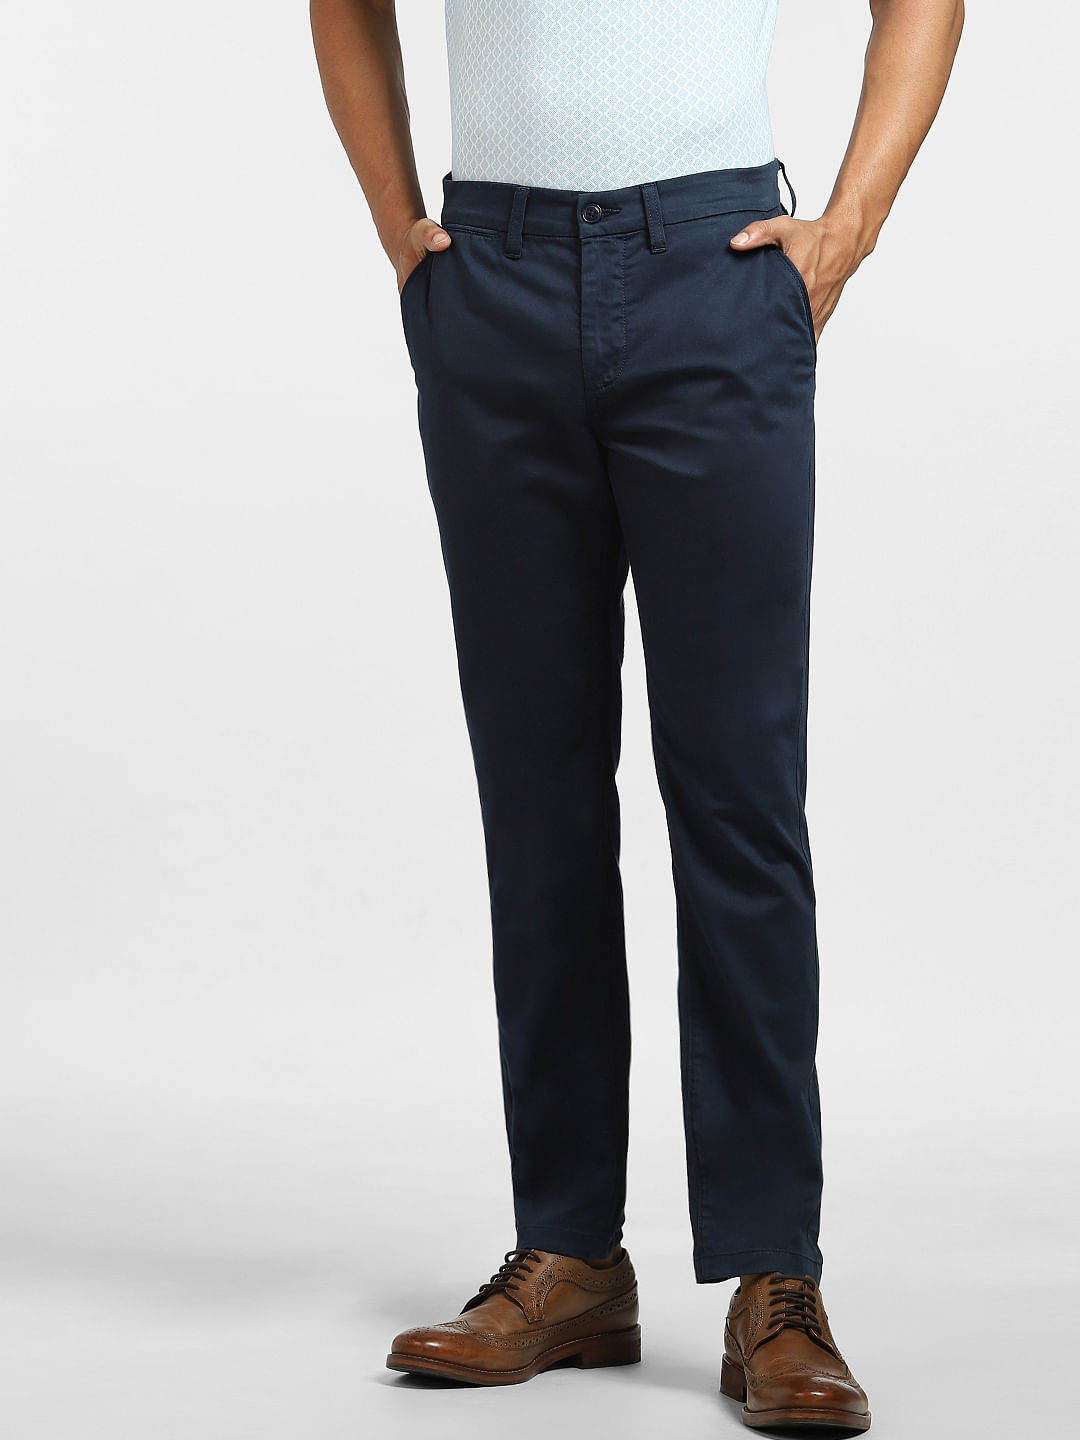 Navy Blue Straight Cotton Pants | Solid Navy Blue Straight Pants | Untung